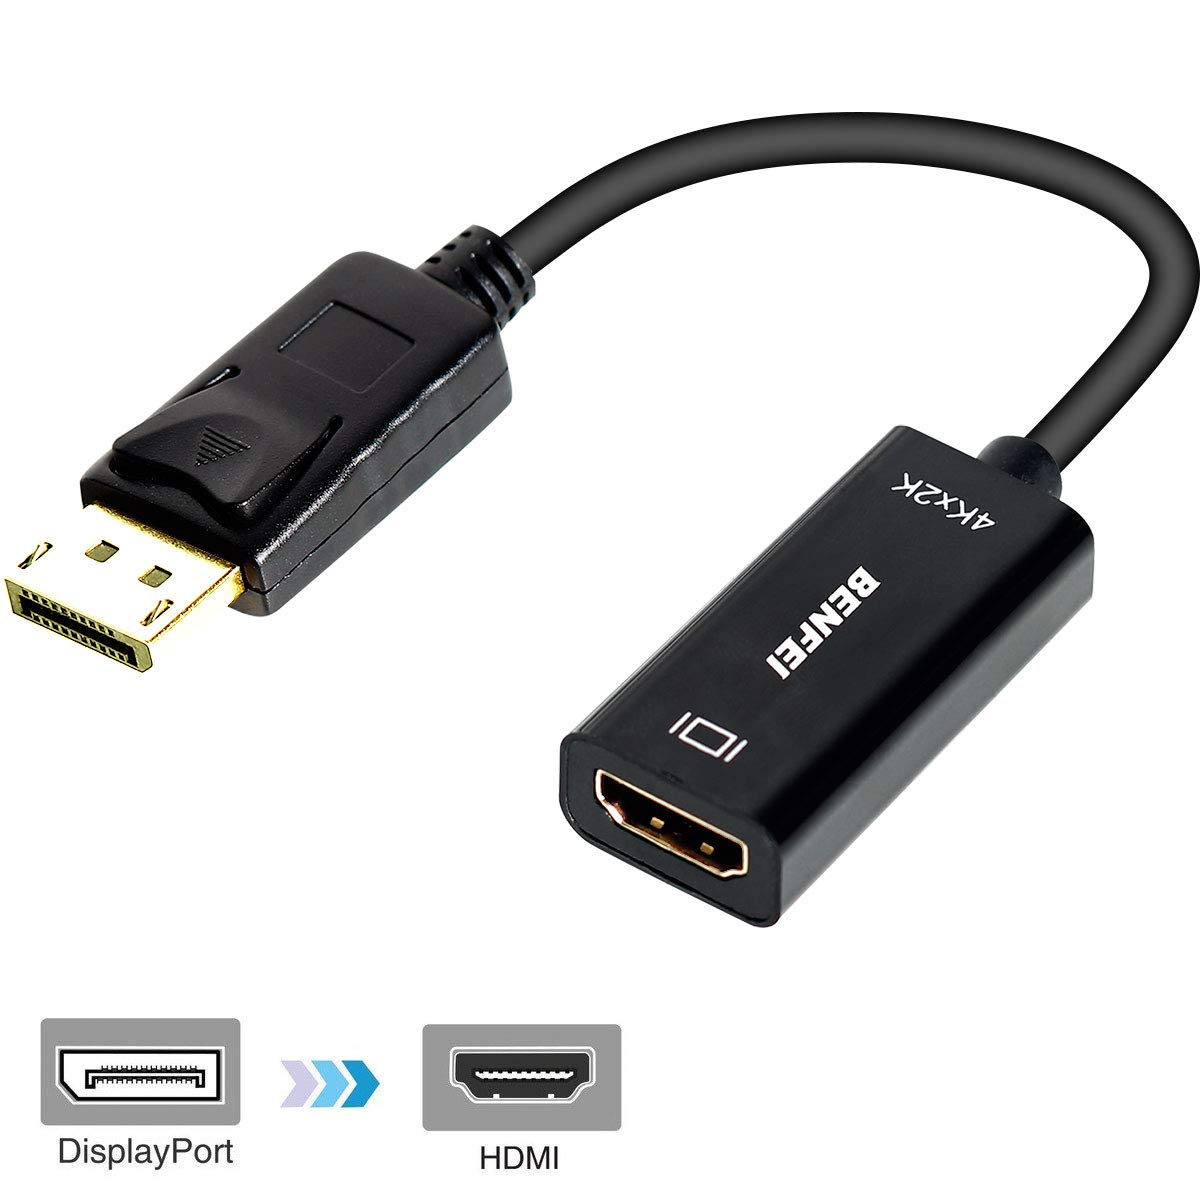 DisplayPort to HDMI 4K UHD Adapter with Audio DP Display Port to HDMI Ultra HD 4K 2K 3D Converter Male to Female Gold-Plated Cord for Lenovo Dell HP and Other Brand